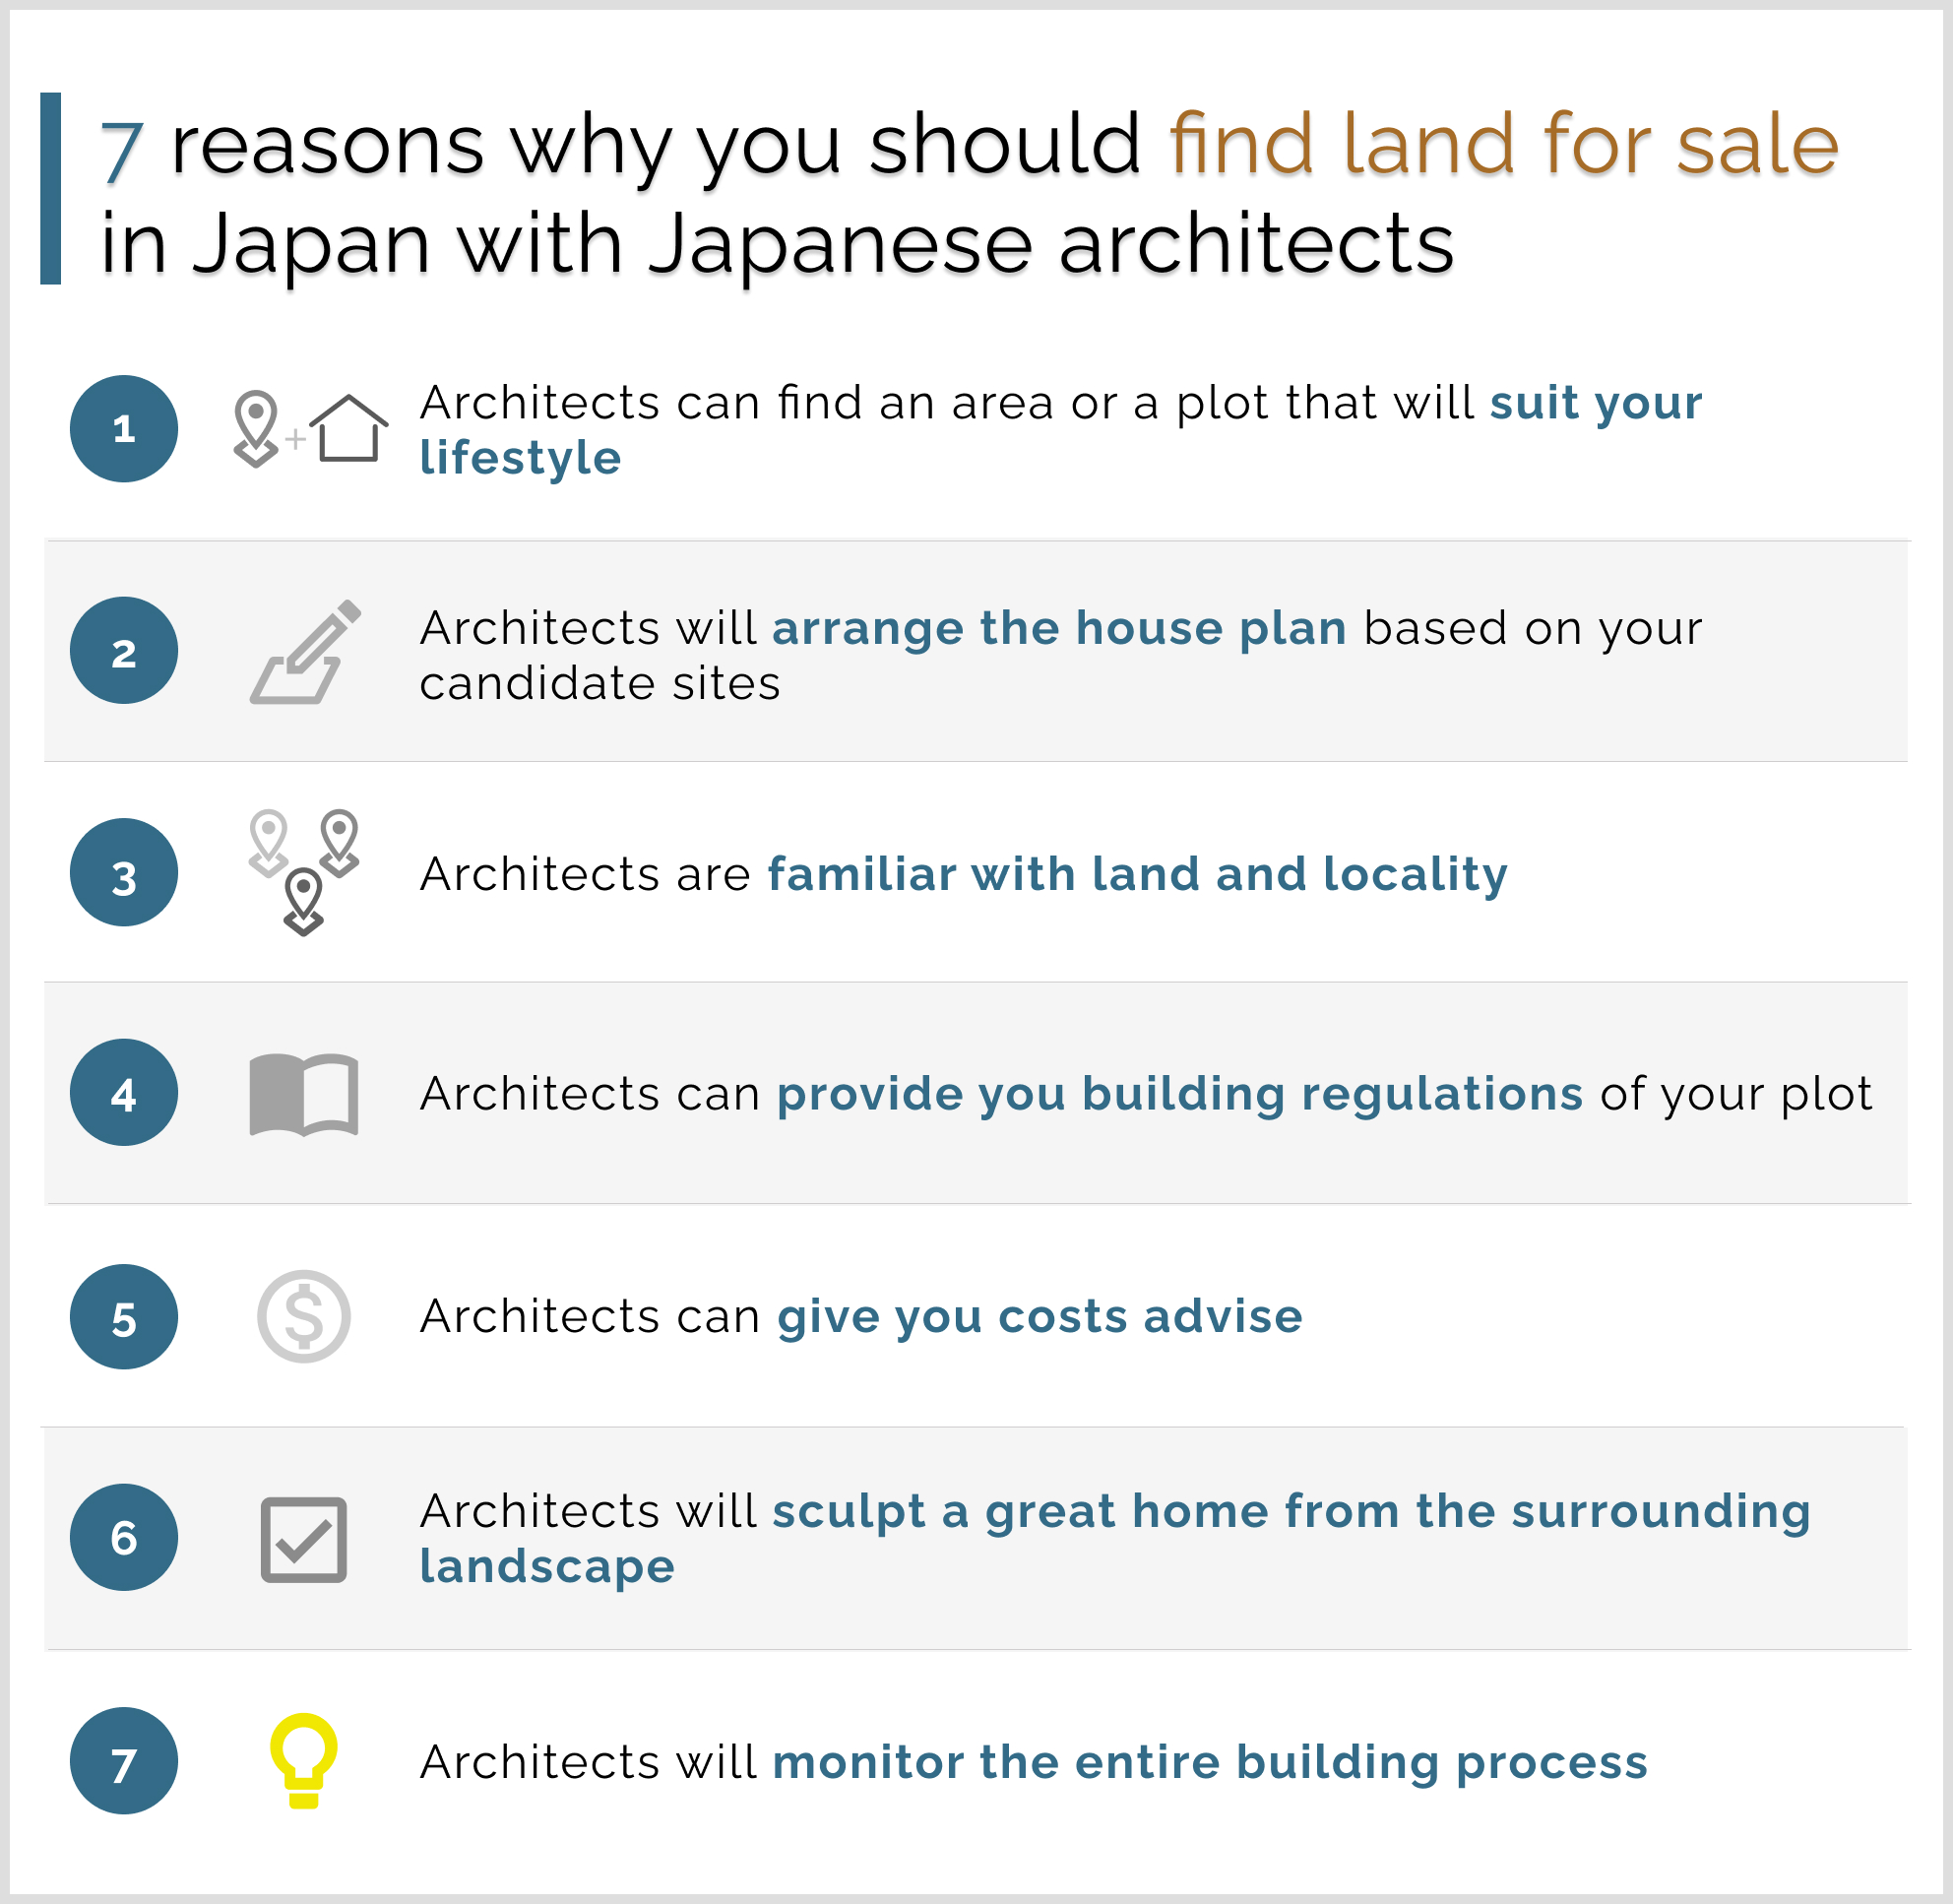 7 reasons why you should find land for sale in Japan with Japanese architects